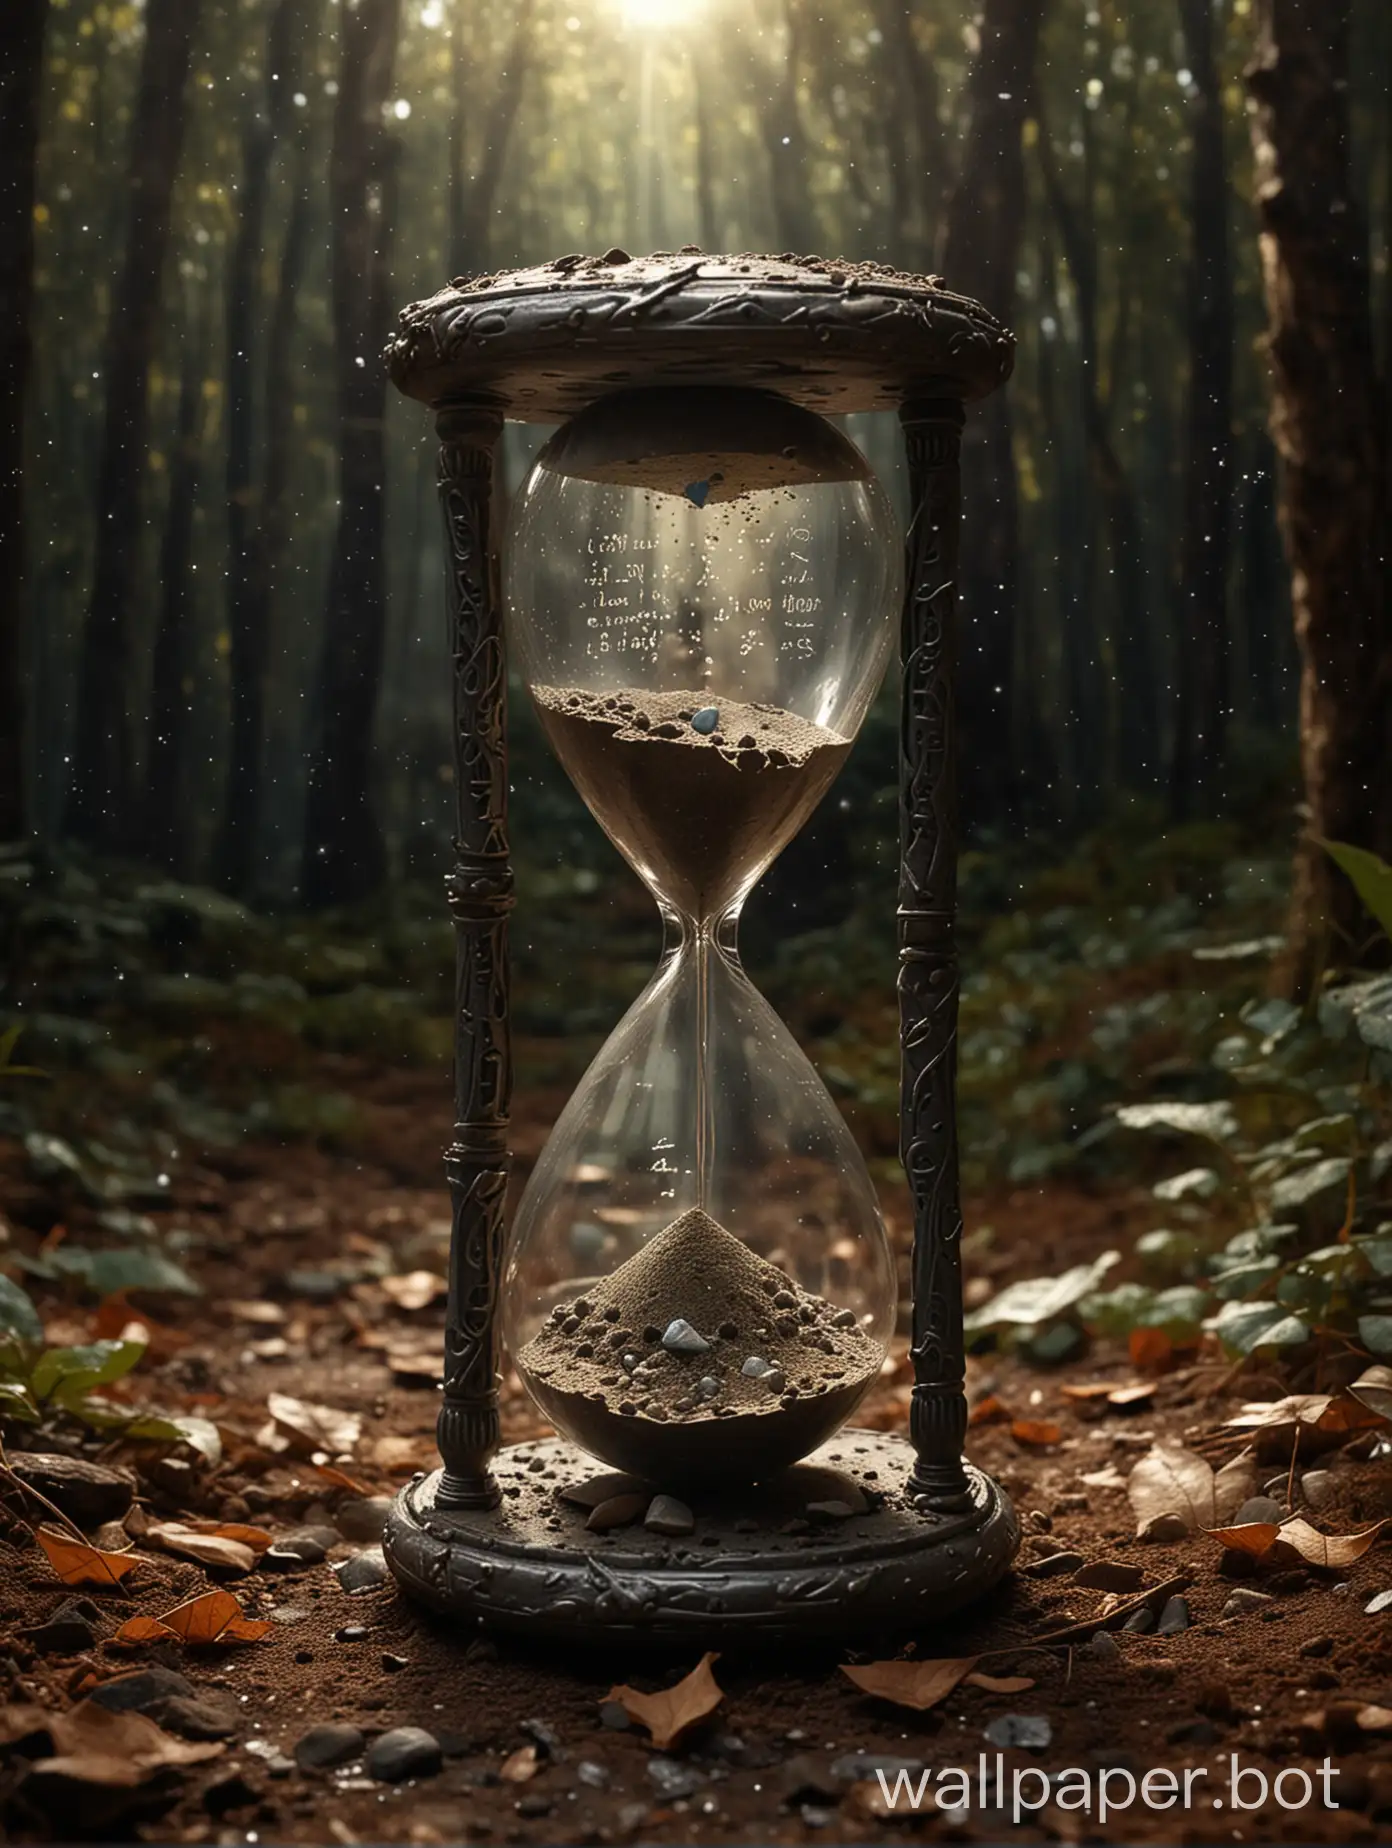 an old relic hourglass made of aged irregular titanium with mild dust accumulated on it and unknown ancient writing around the frame. Inside the top half of the hourglass is a glowing pulsing sun with rays. on the inside of the bottom half of the hourglass will be a bright detailed moon in space with space dust and tiny stars, expended grains of sand at the bottom of the lower portion of the hourglass which is sitting on a forest floor with decaying leaves. lighting will be cinematic chiaroscuro. insanely detailed. super resolution.